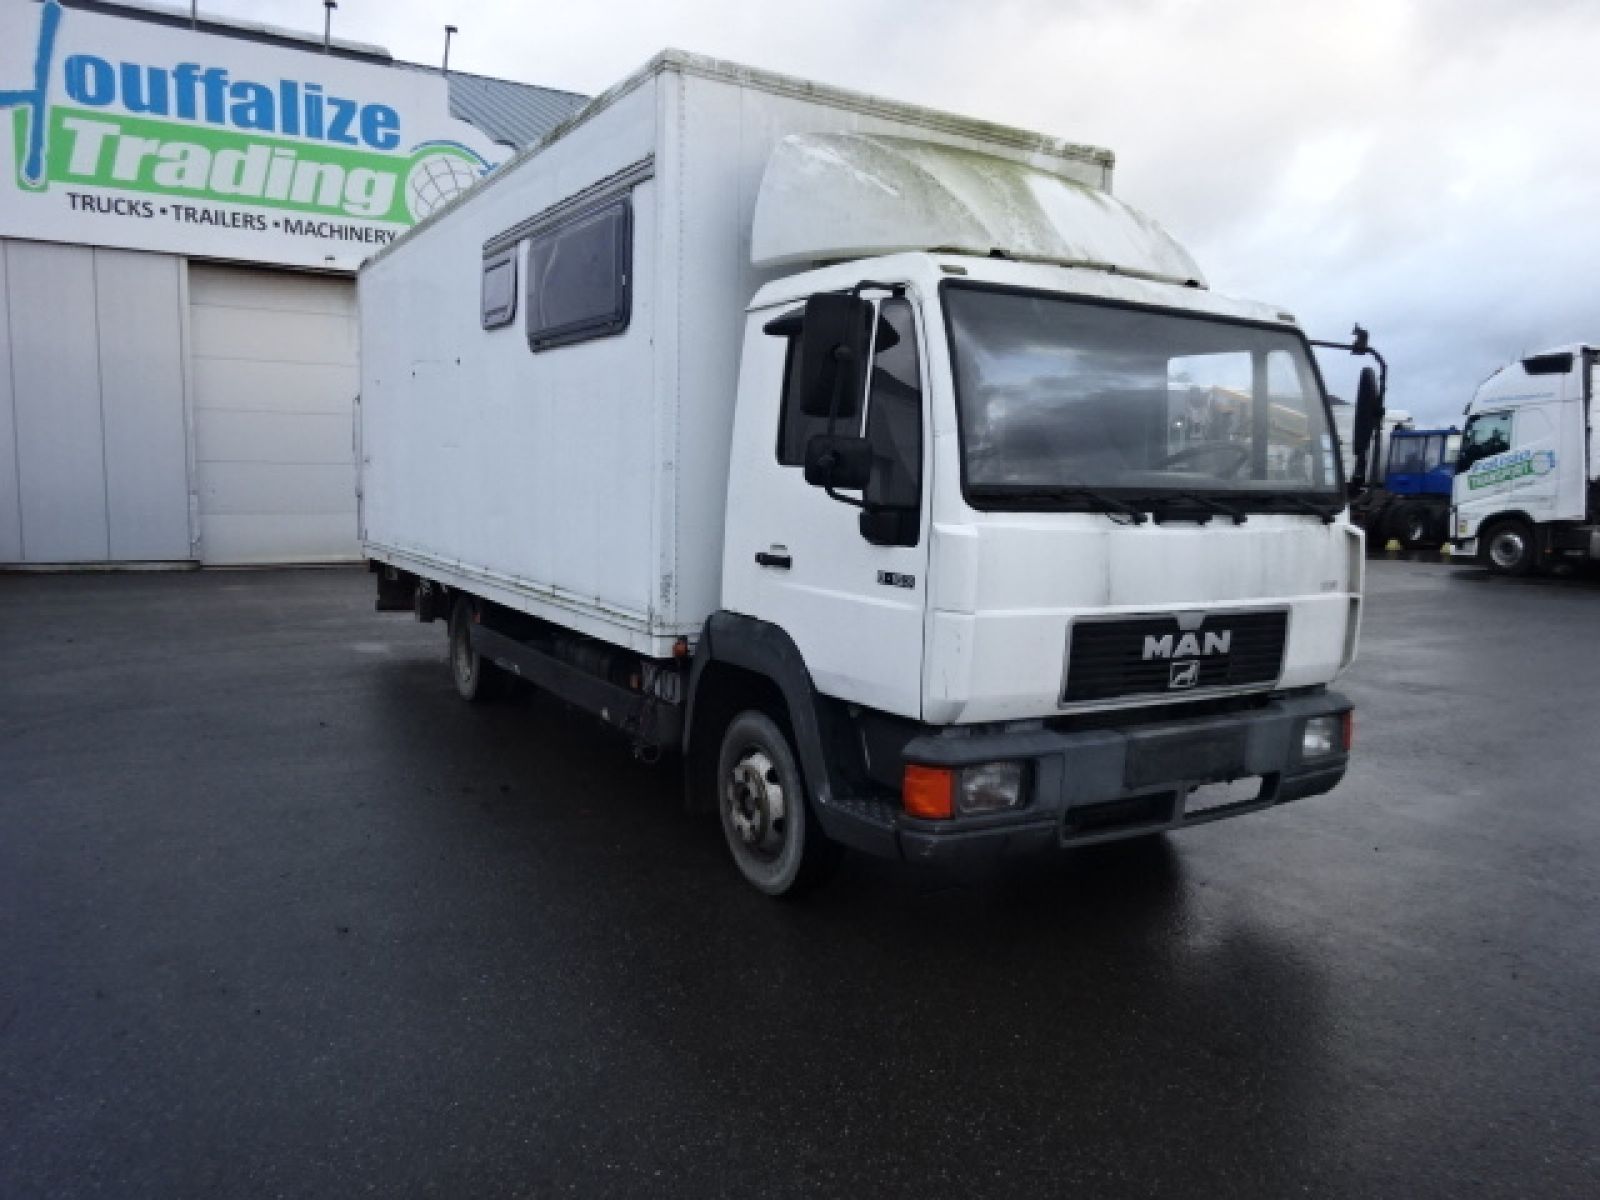 Second hand sale Truck units - MAN 9.163  148 (Belgique - Europe) - Houffalize Trading s.a.